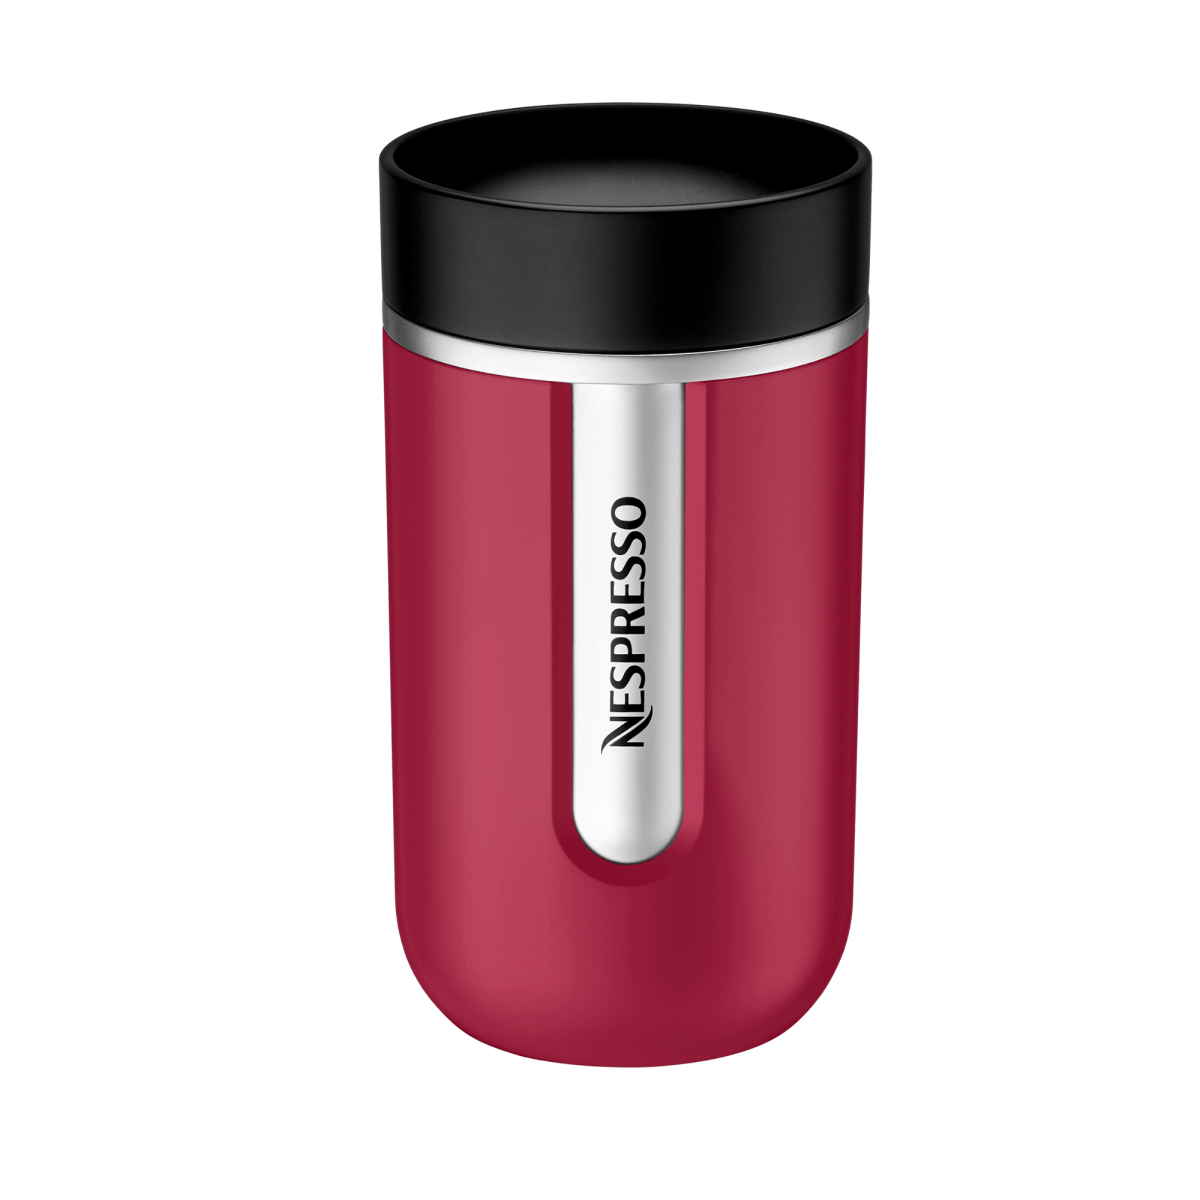 https://www.nespresso.com/shared_res/agility/global/accessories/collection/sku-main-info-product/nomad-travel-mug-raspberry-red_2x.png